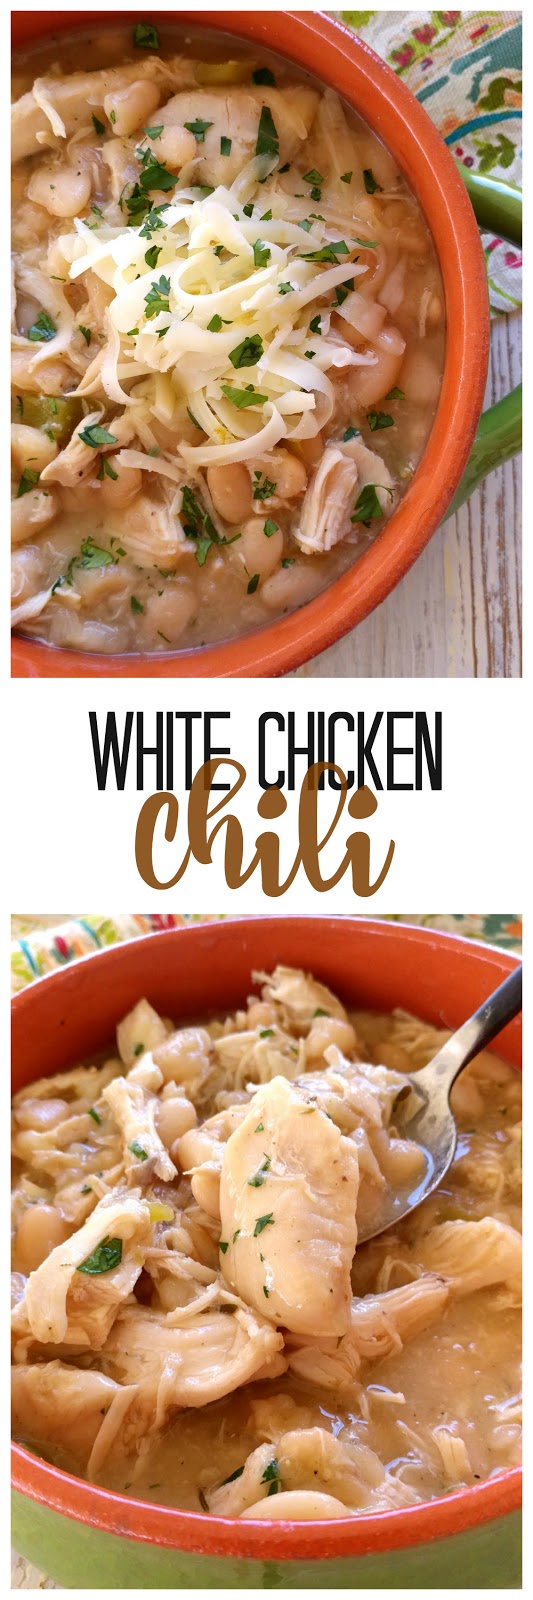 South Your Mouth: White Chicken Chili